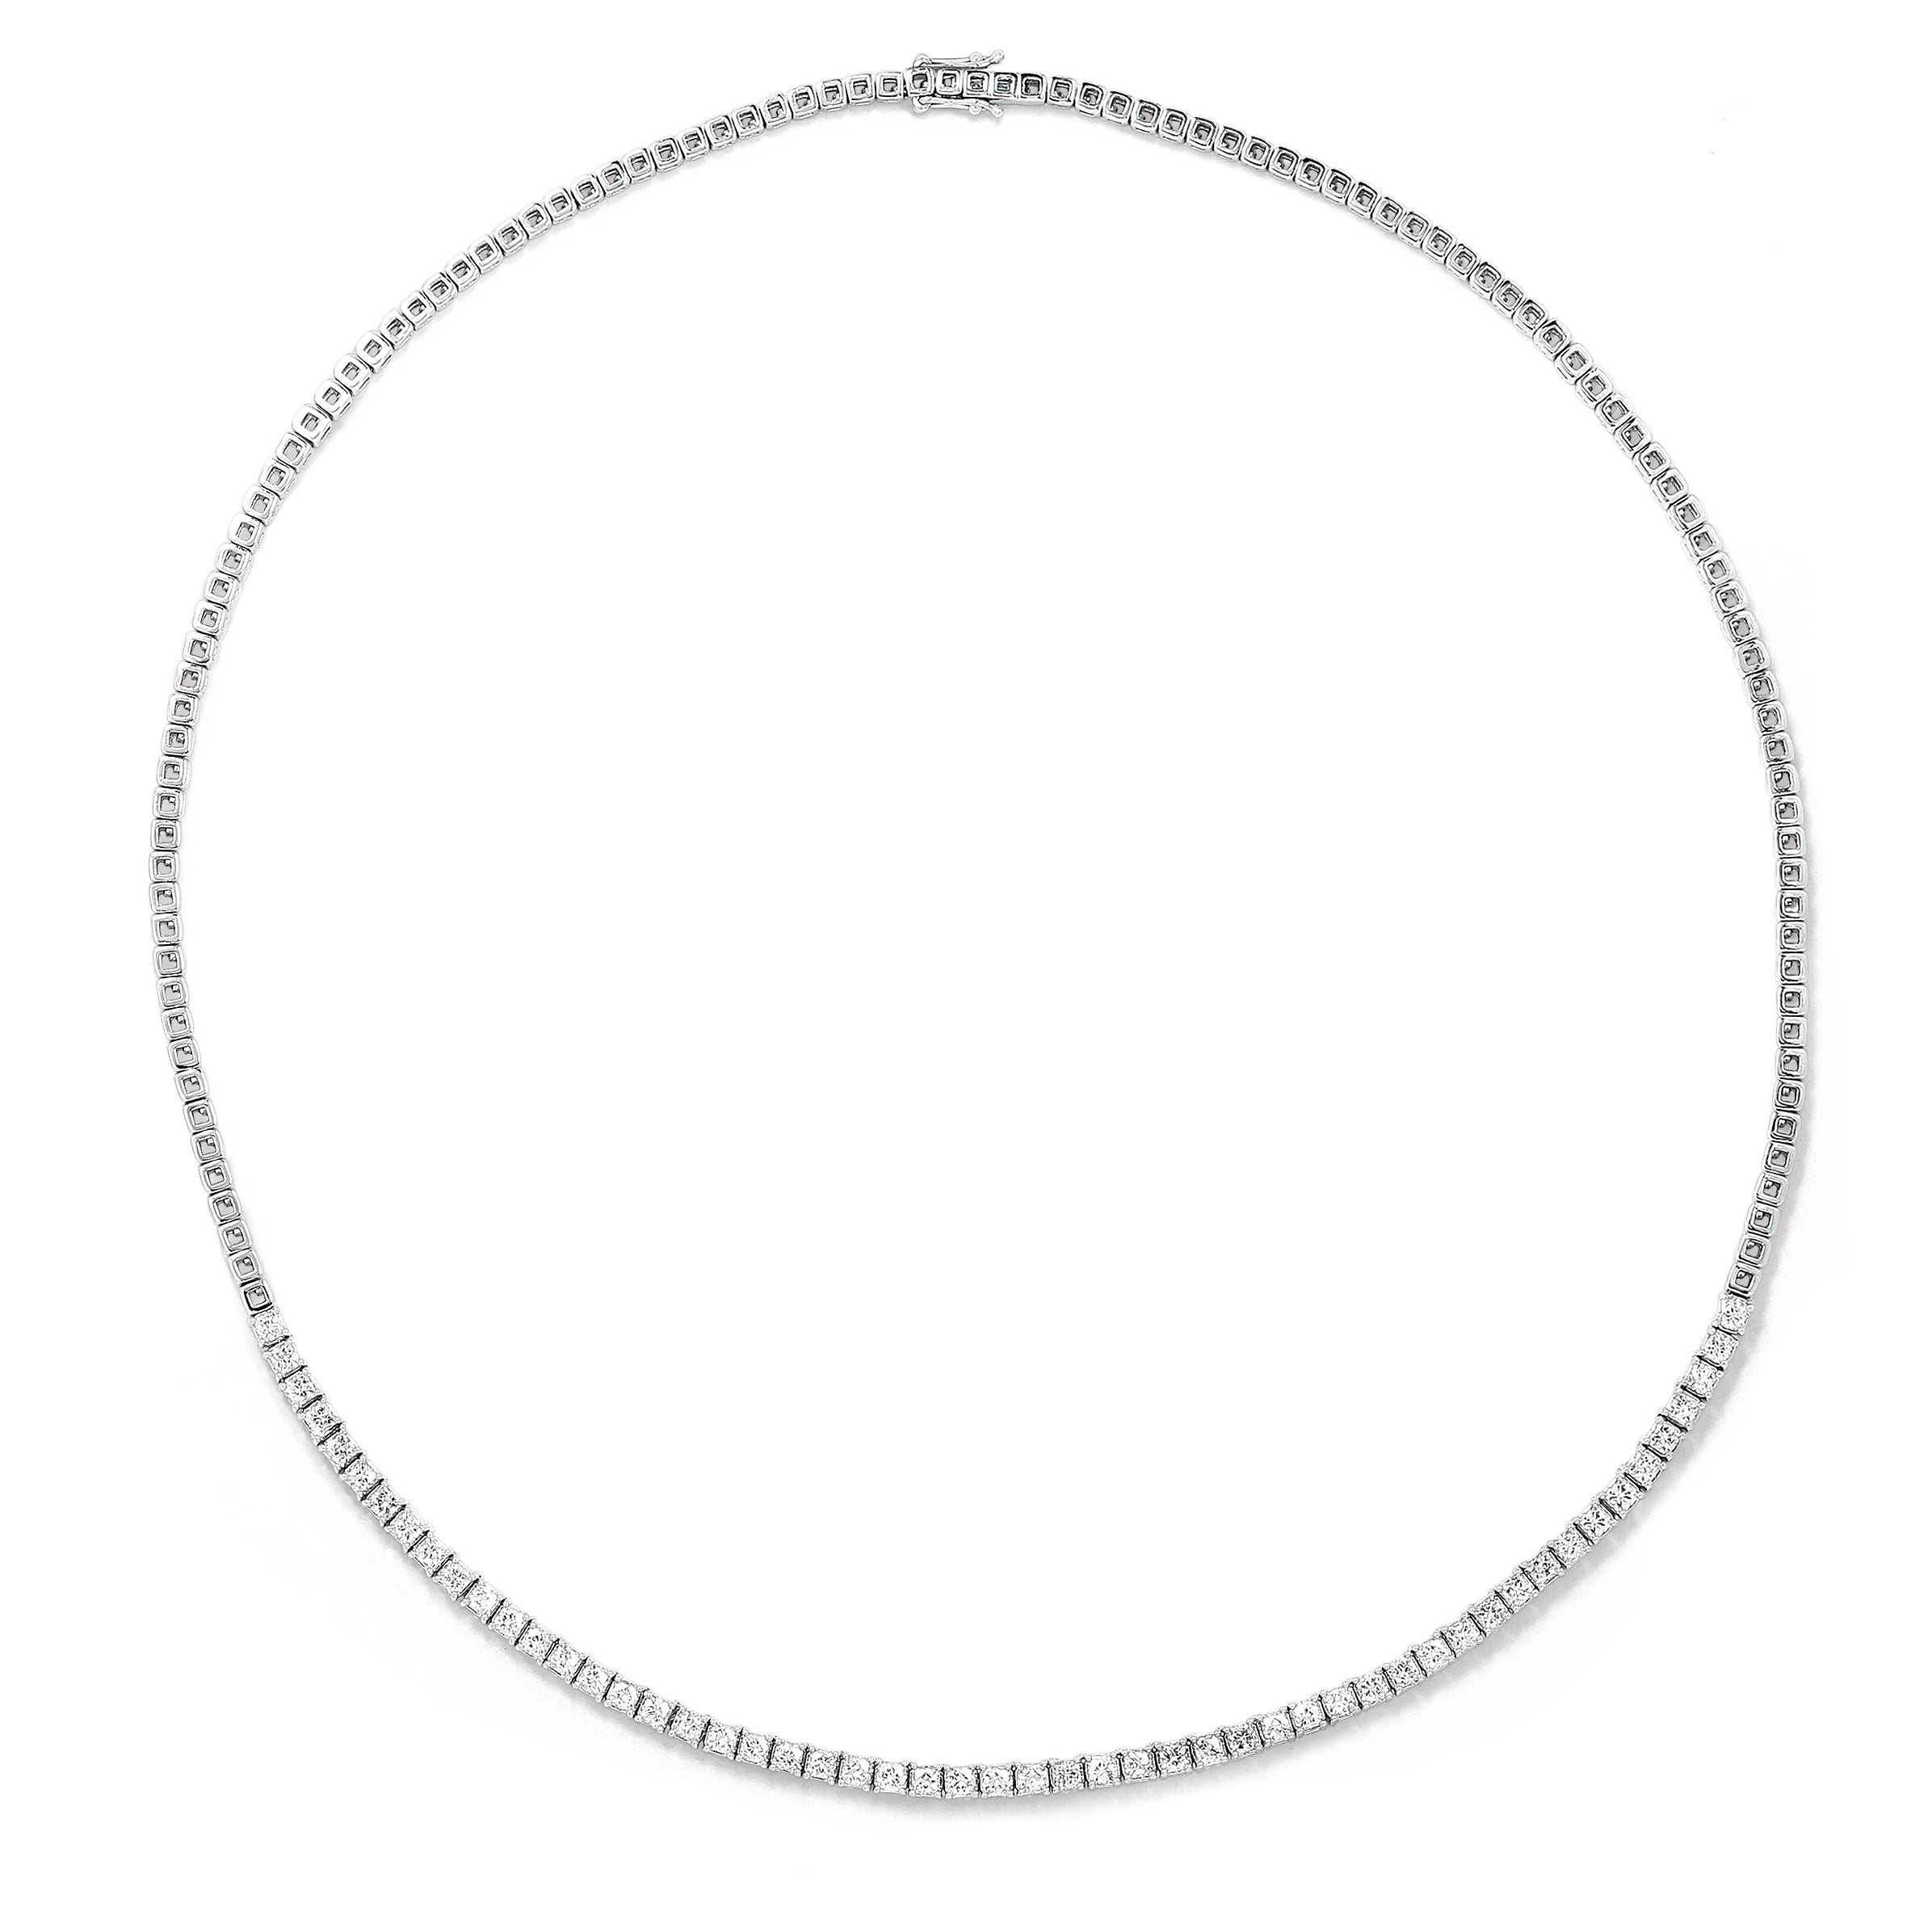 Shimansky - My Girl Diamond Tennis Necklace 4.97ct Crafted in 18K White Gold